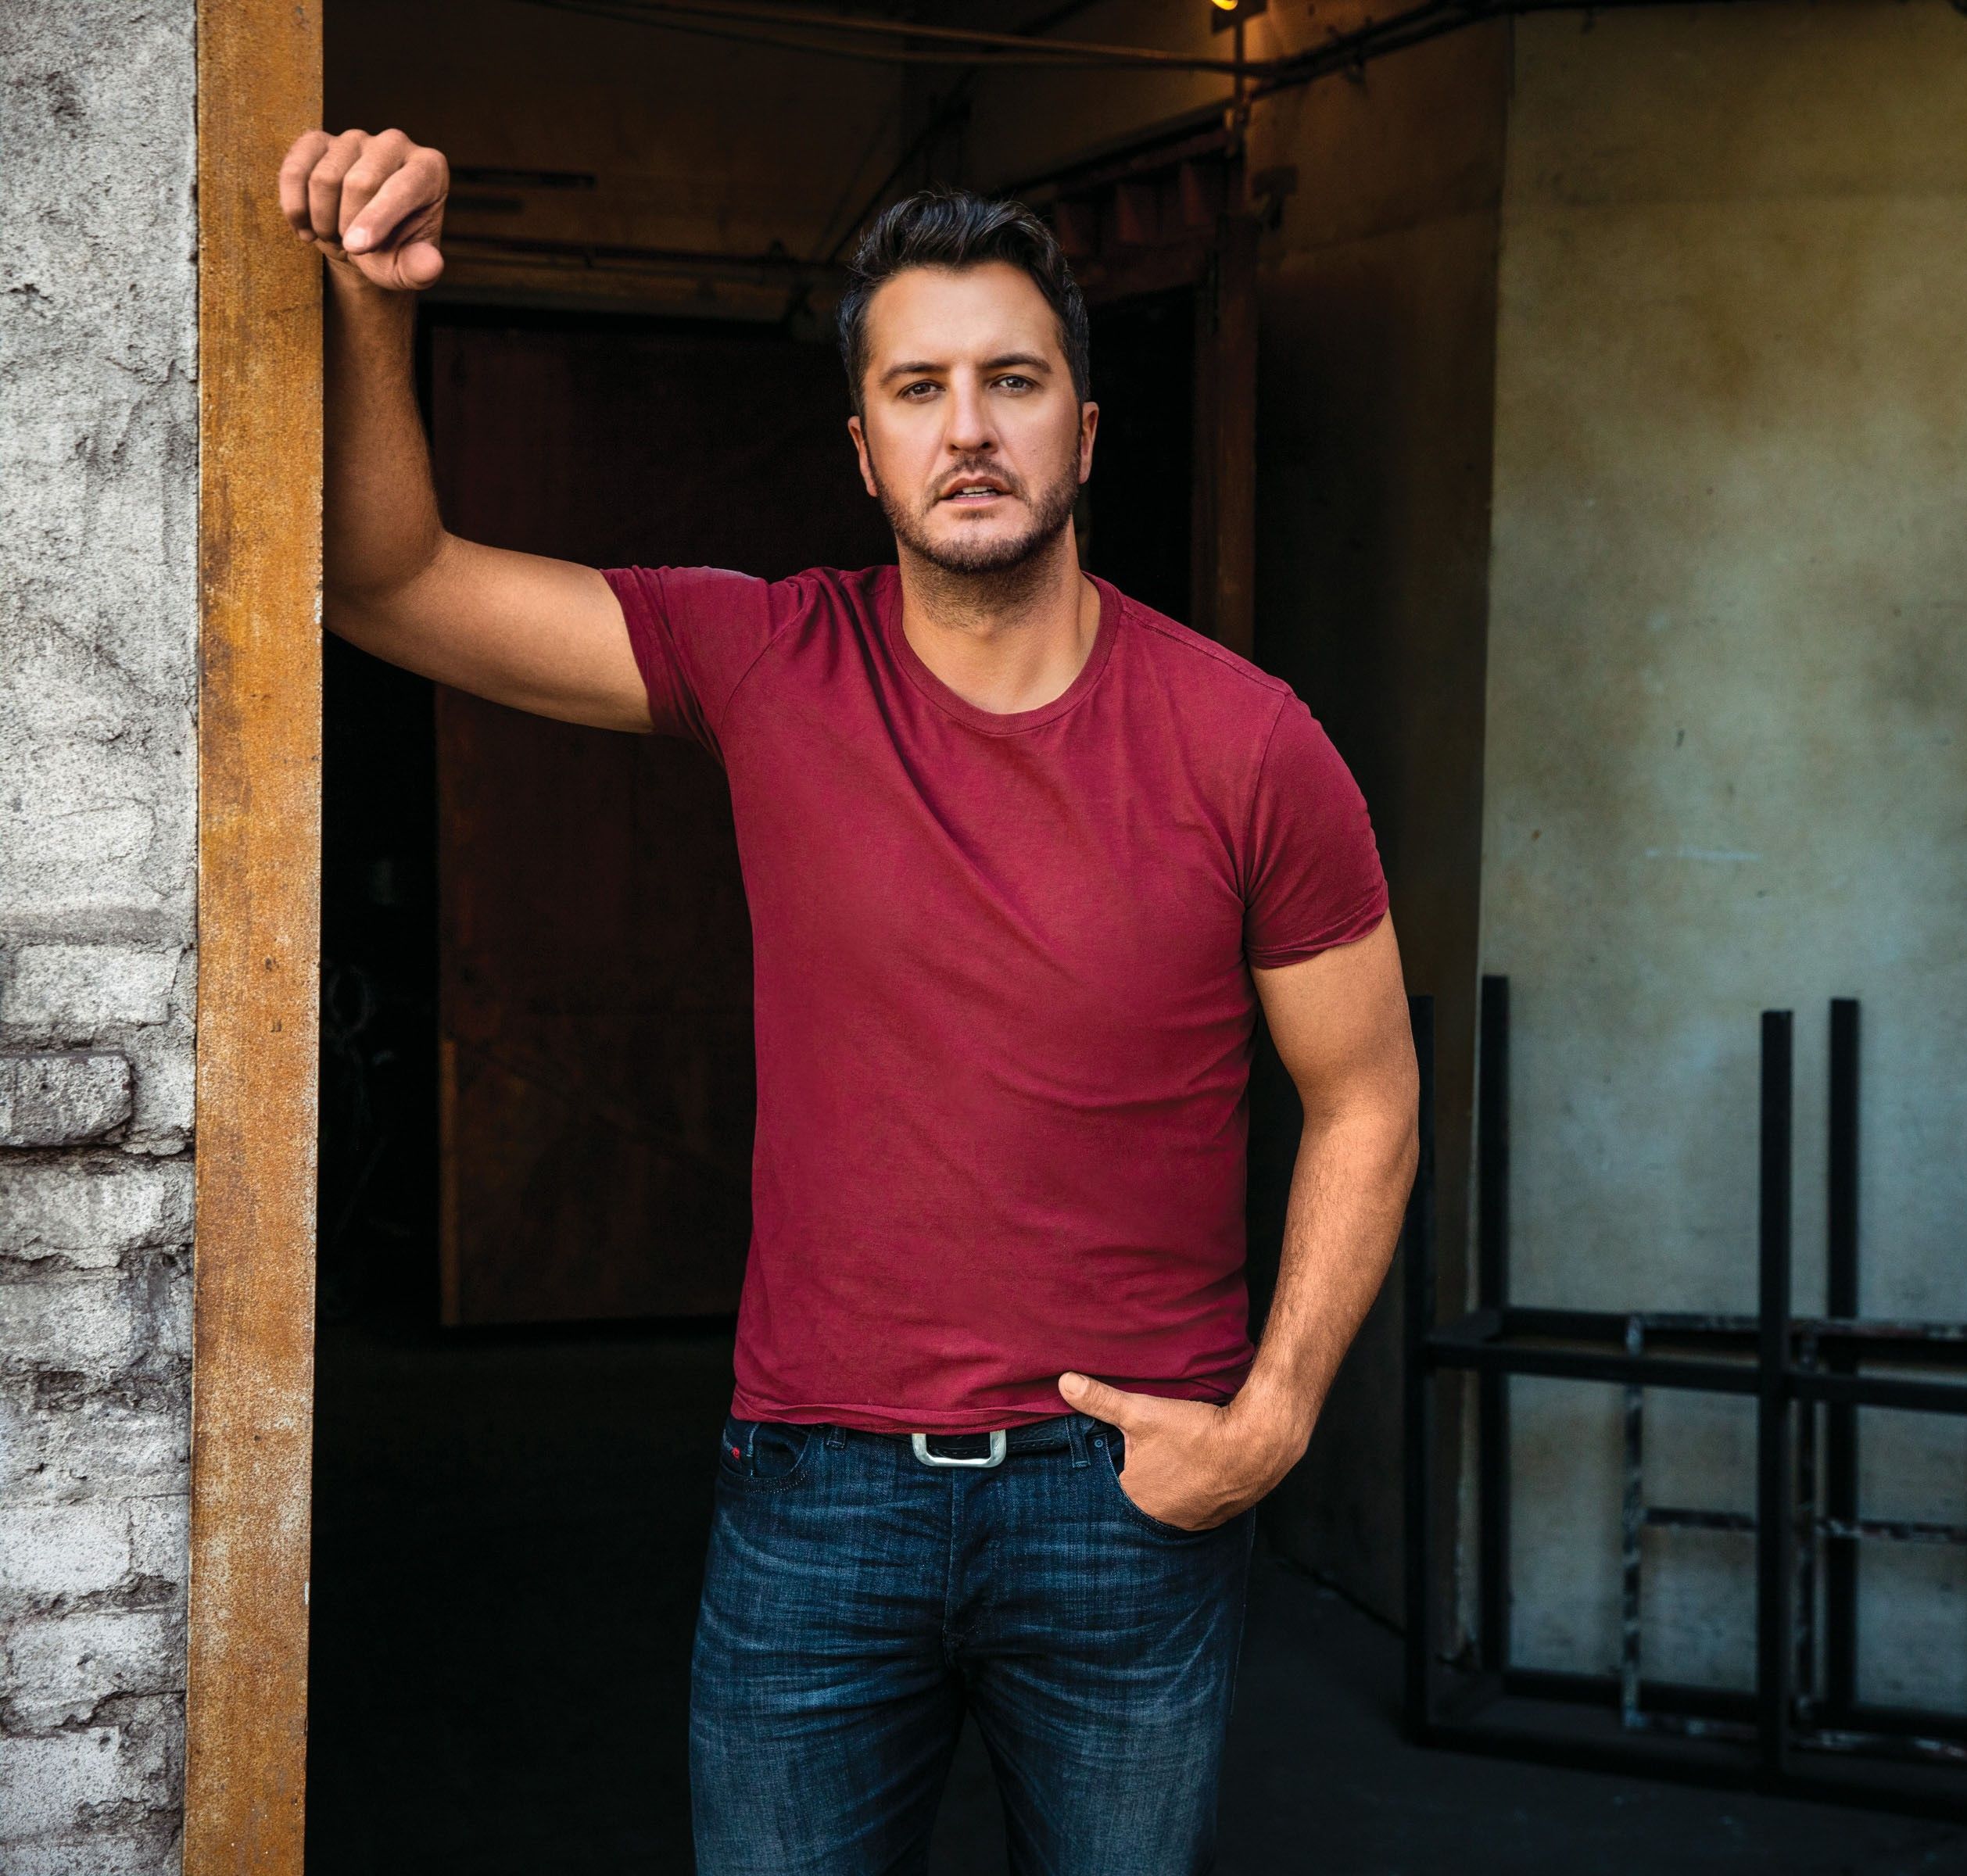 Luke Bryan to Release Deluxe Edition of  “BORN HERE LIVE HERE DIE HERE” on April 9